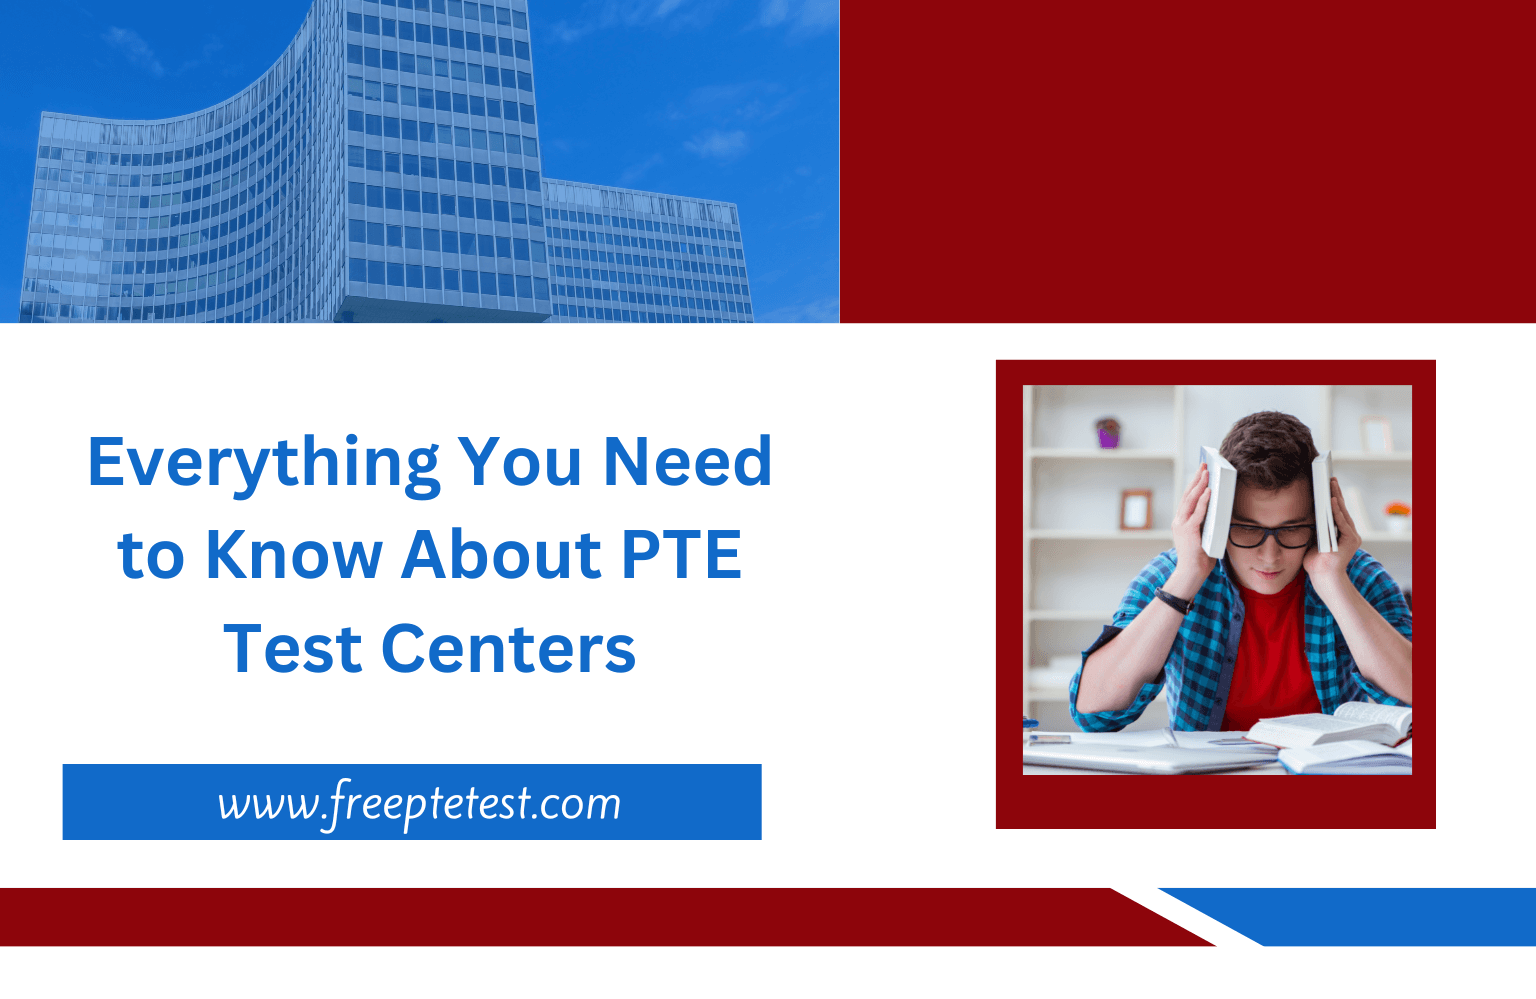 Everything You Need to Know About PTE Test Centers